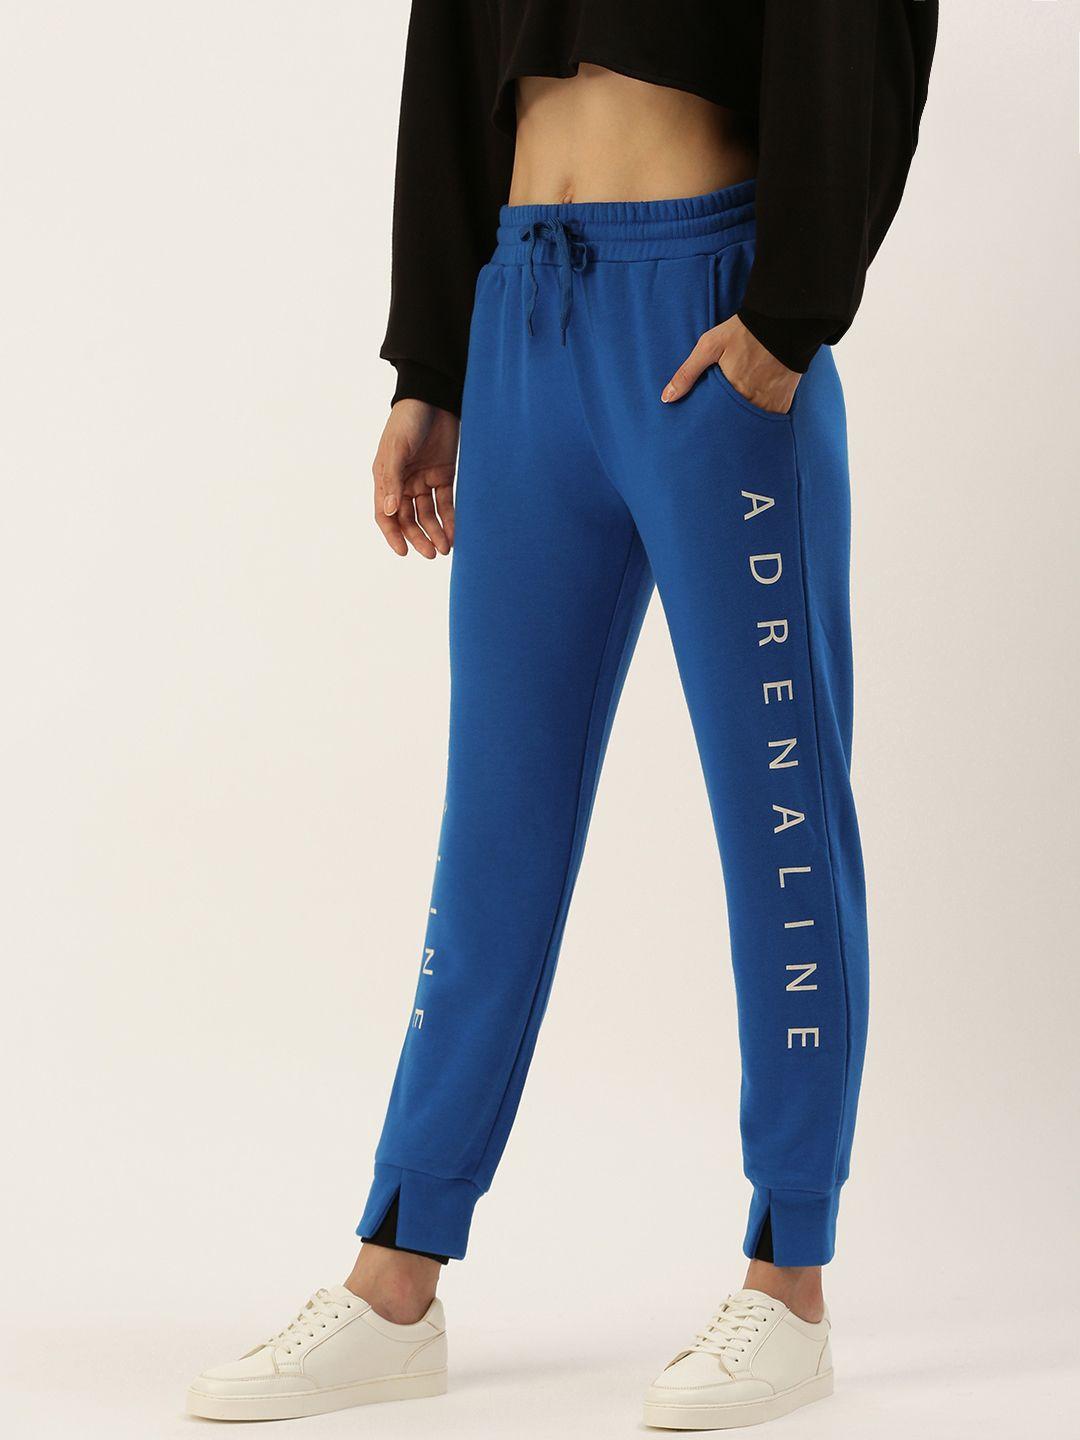 forever-21-women-blue-typography-printed-regular-fit-joggers